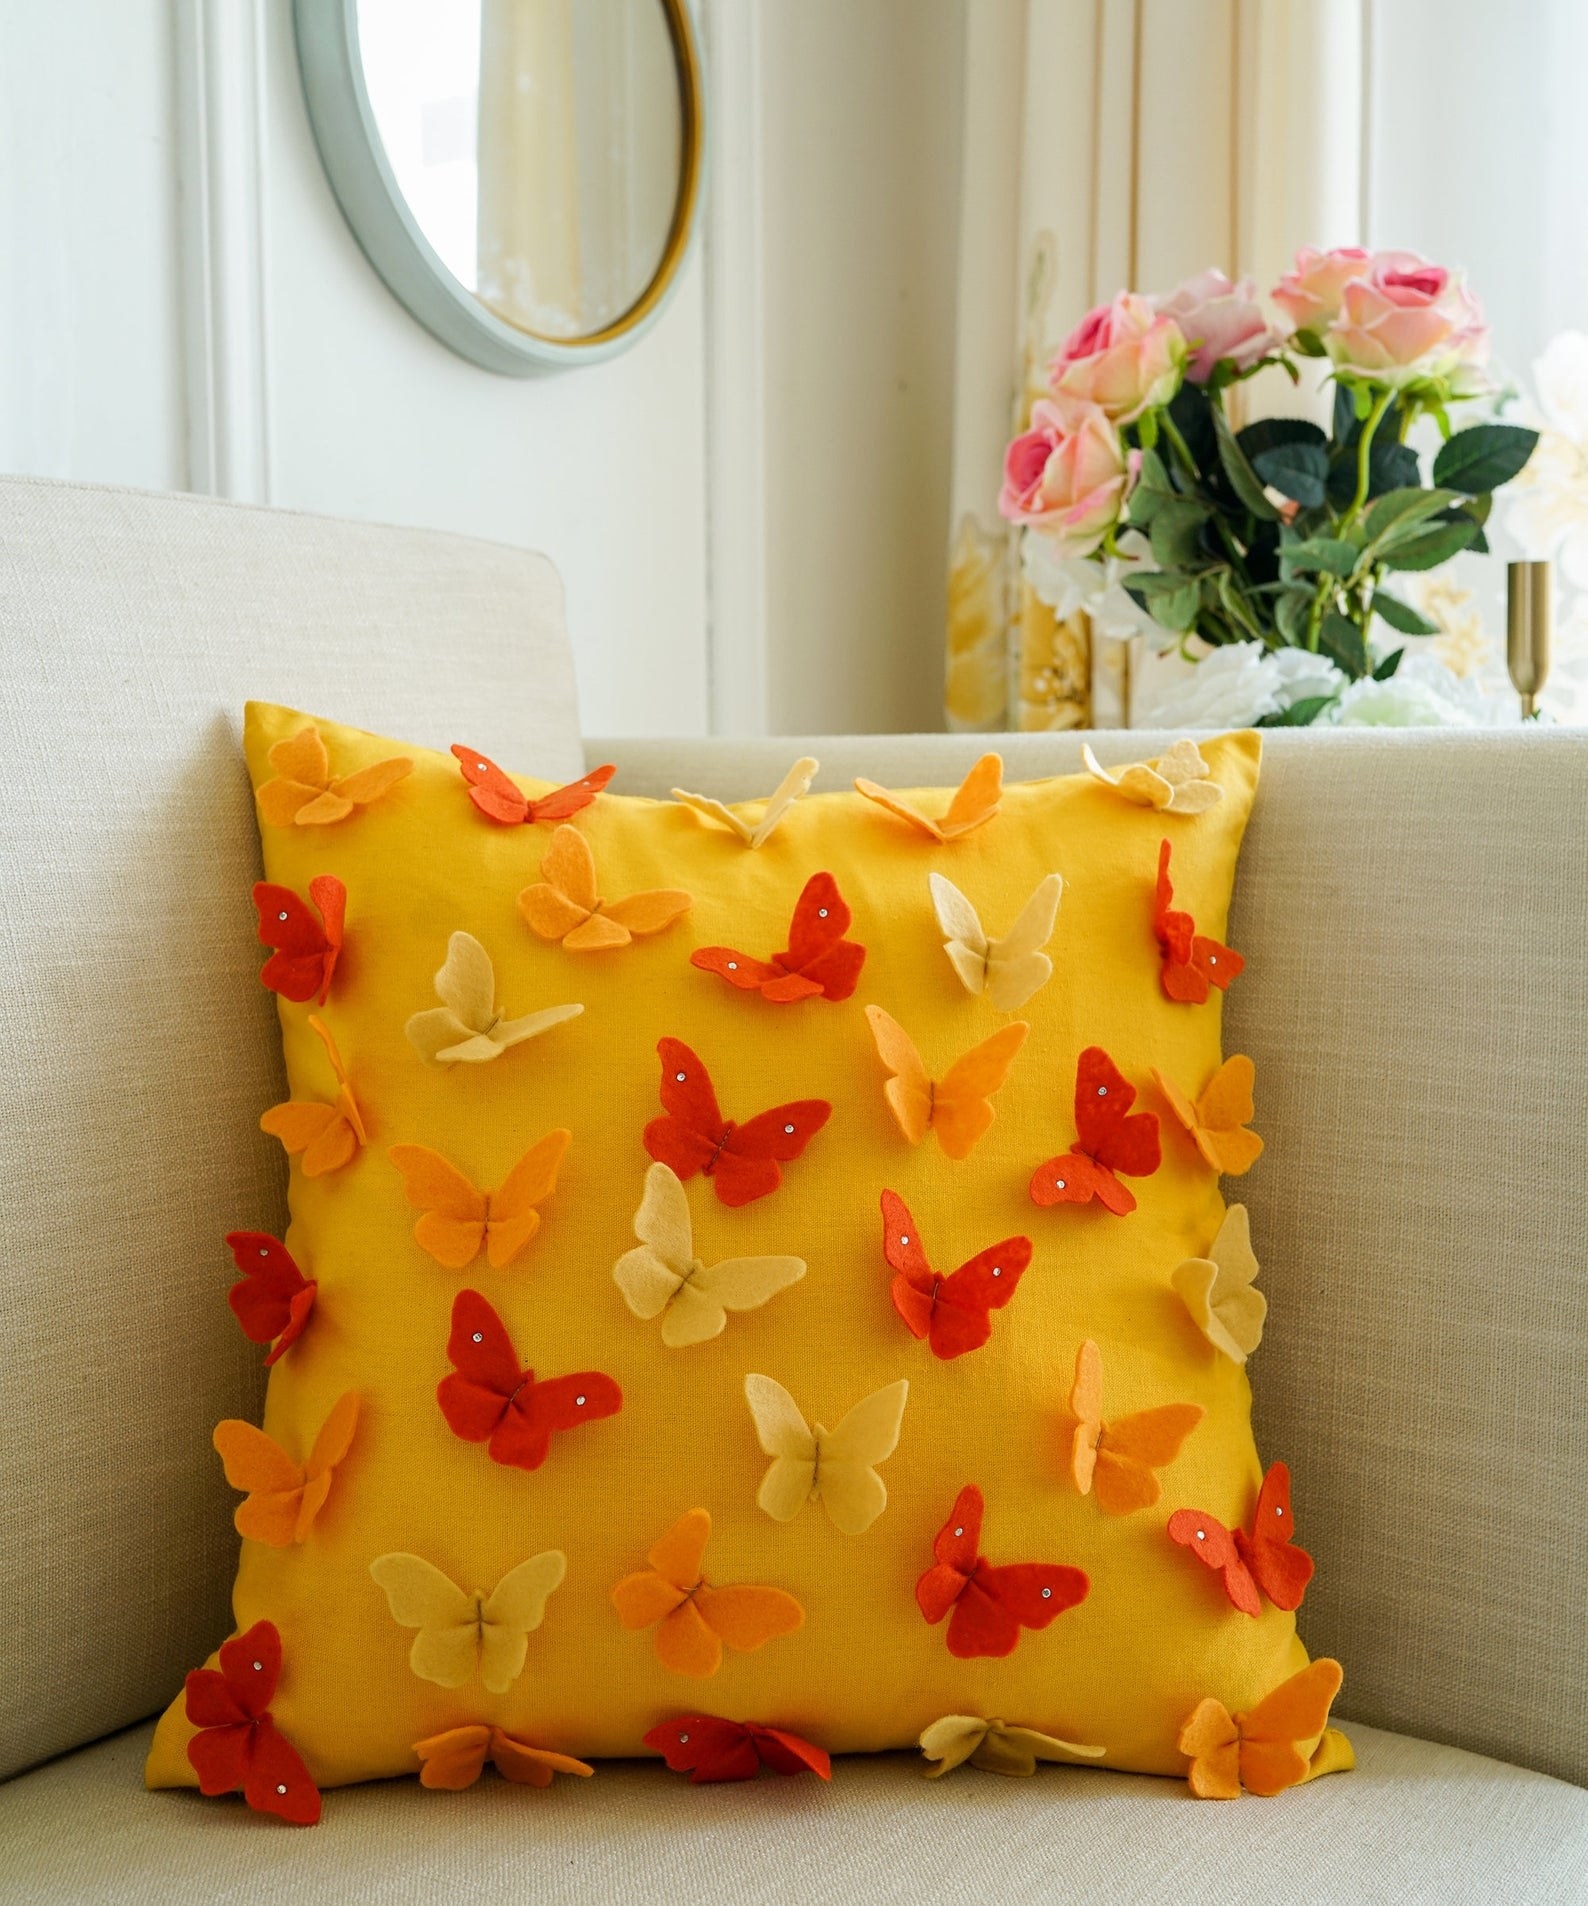 yellow pillow cover with yellow, orange, and red 3D butterflies